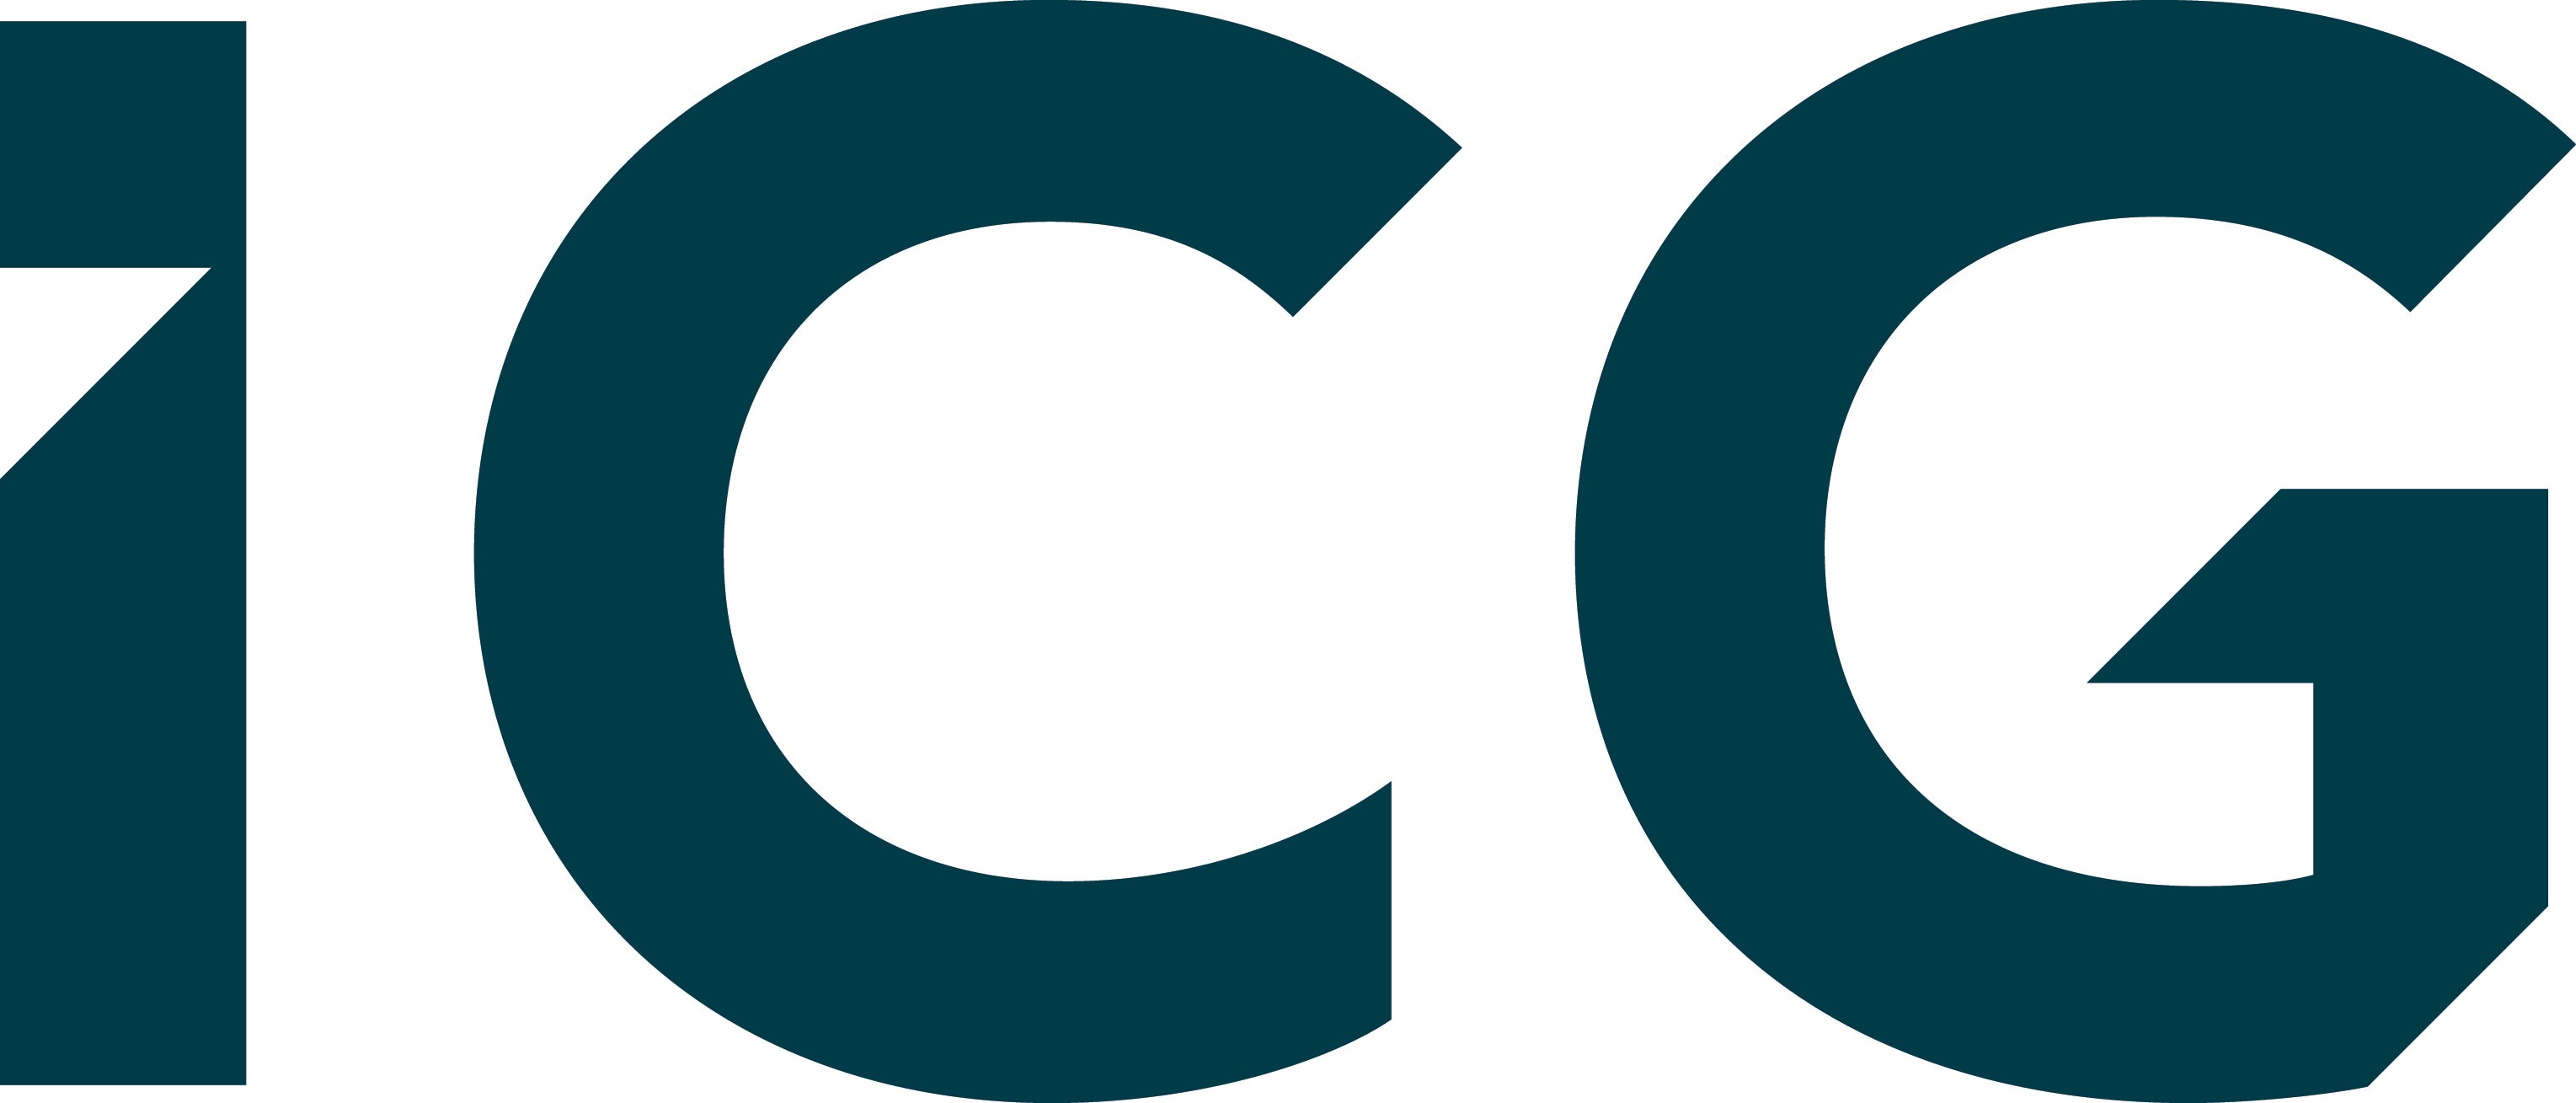 Logo of ICG investment manager